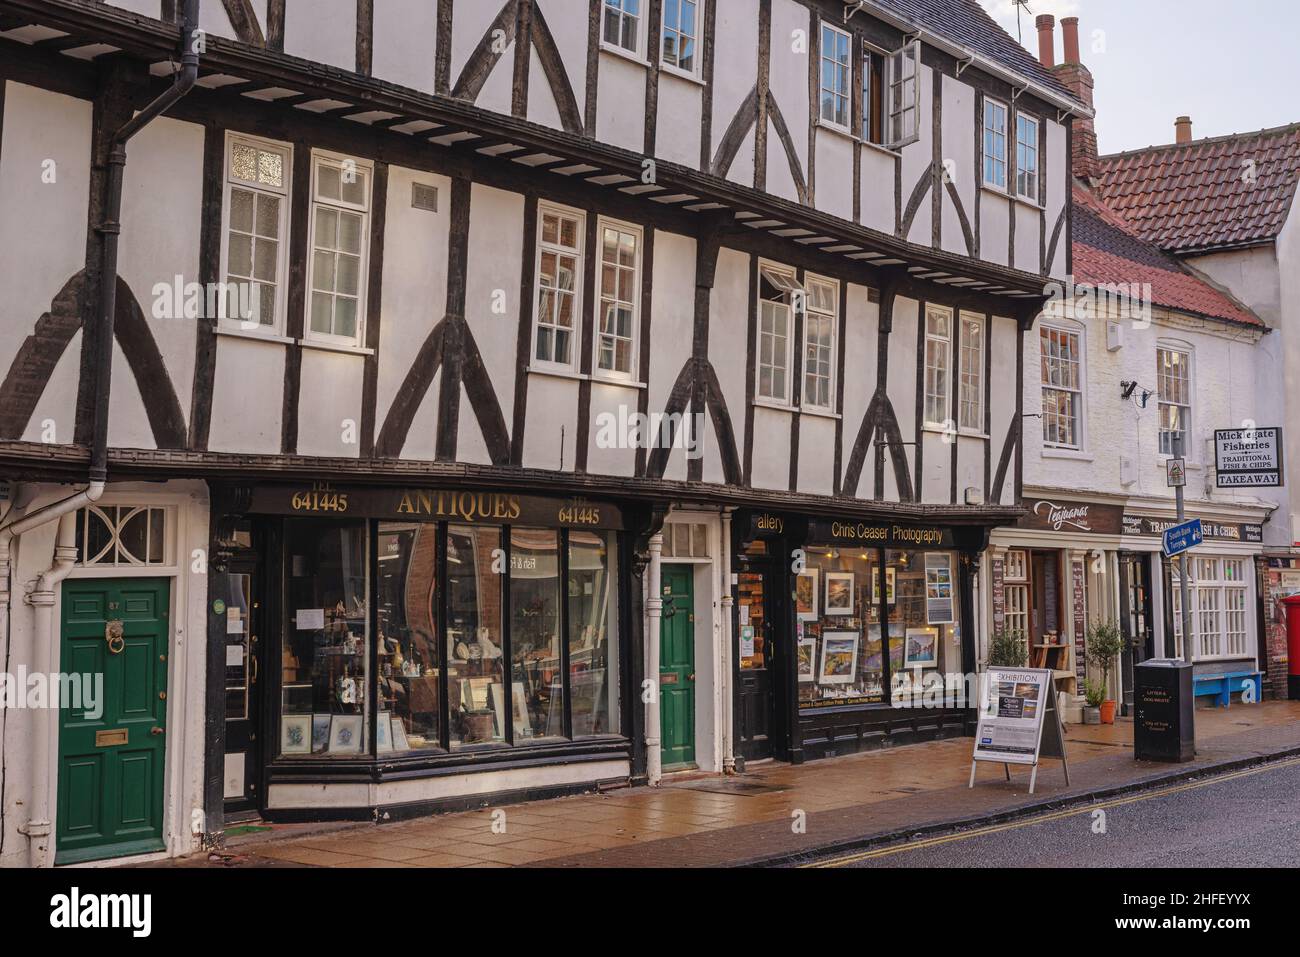 An ancient half-timbered building with a row of shops on the ground floor.  The pavement is wet from recent rain. Stock Photo